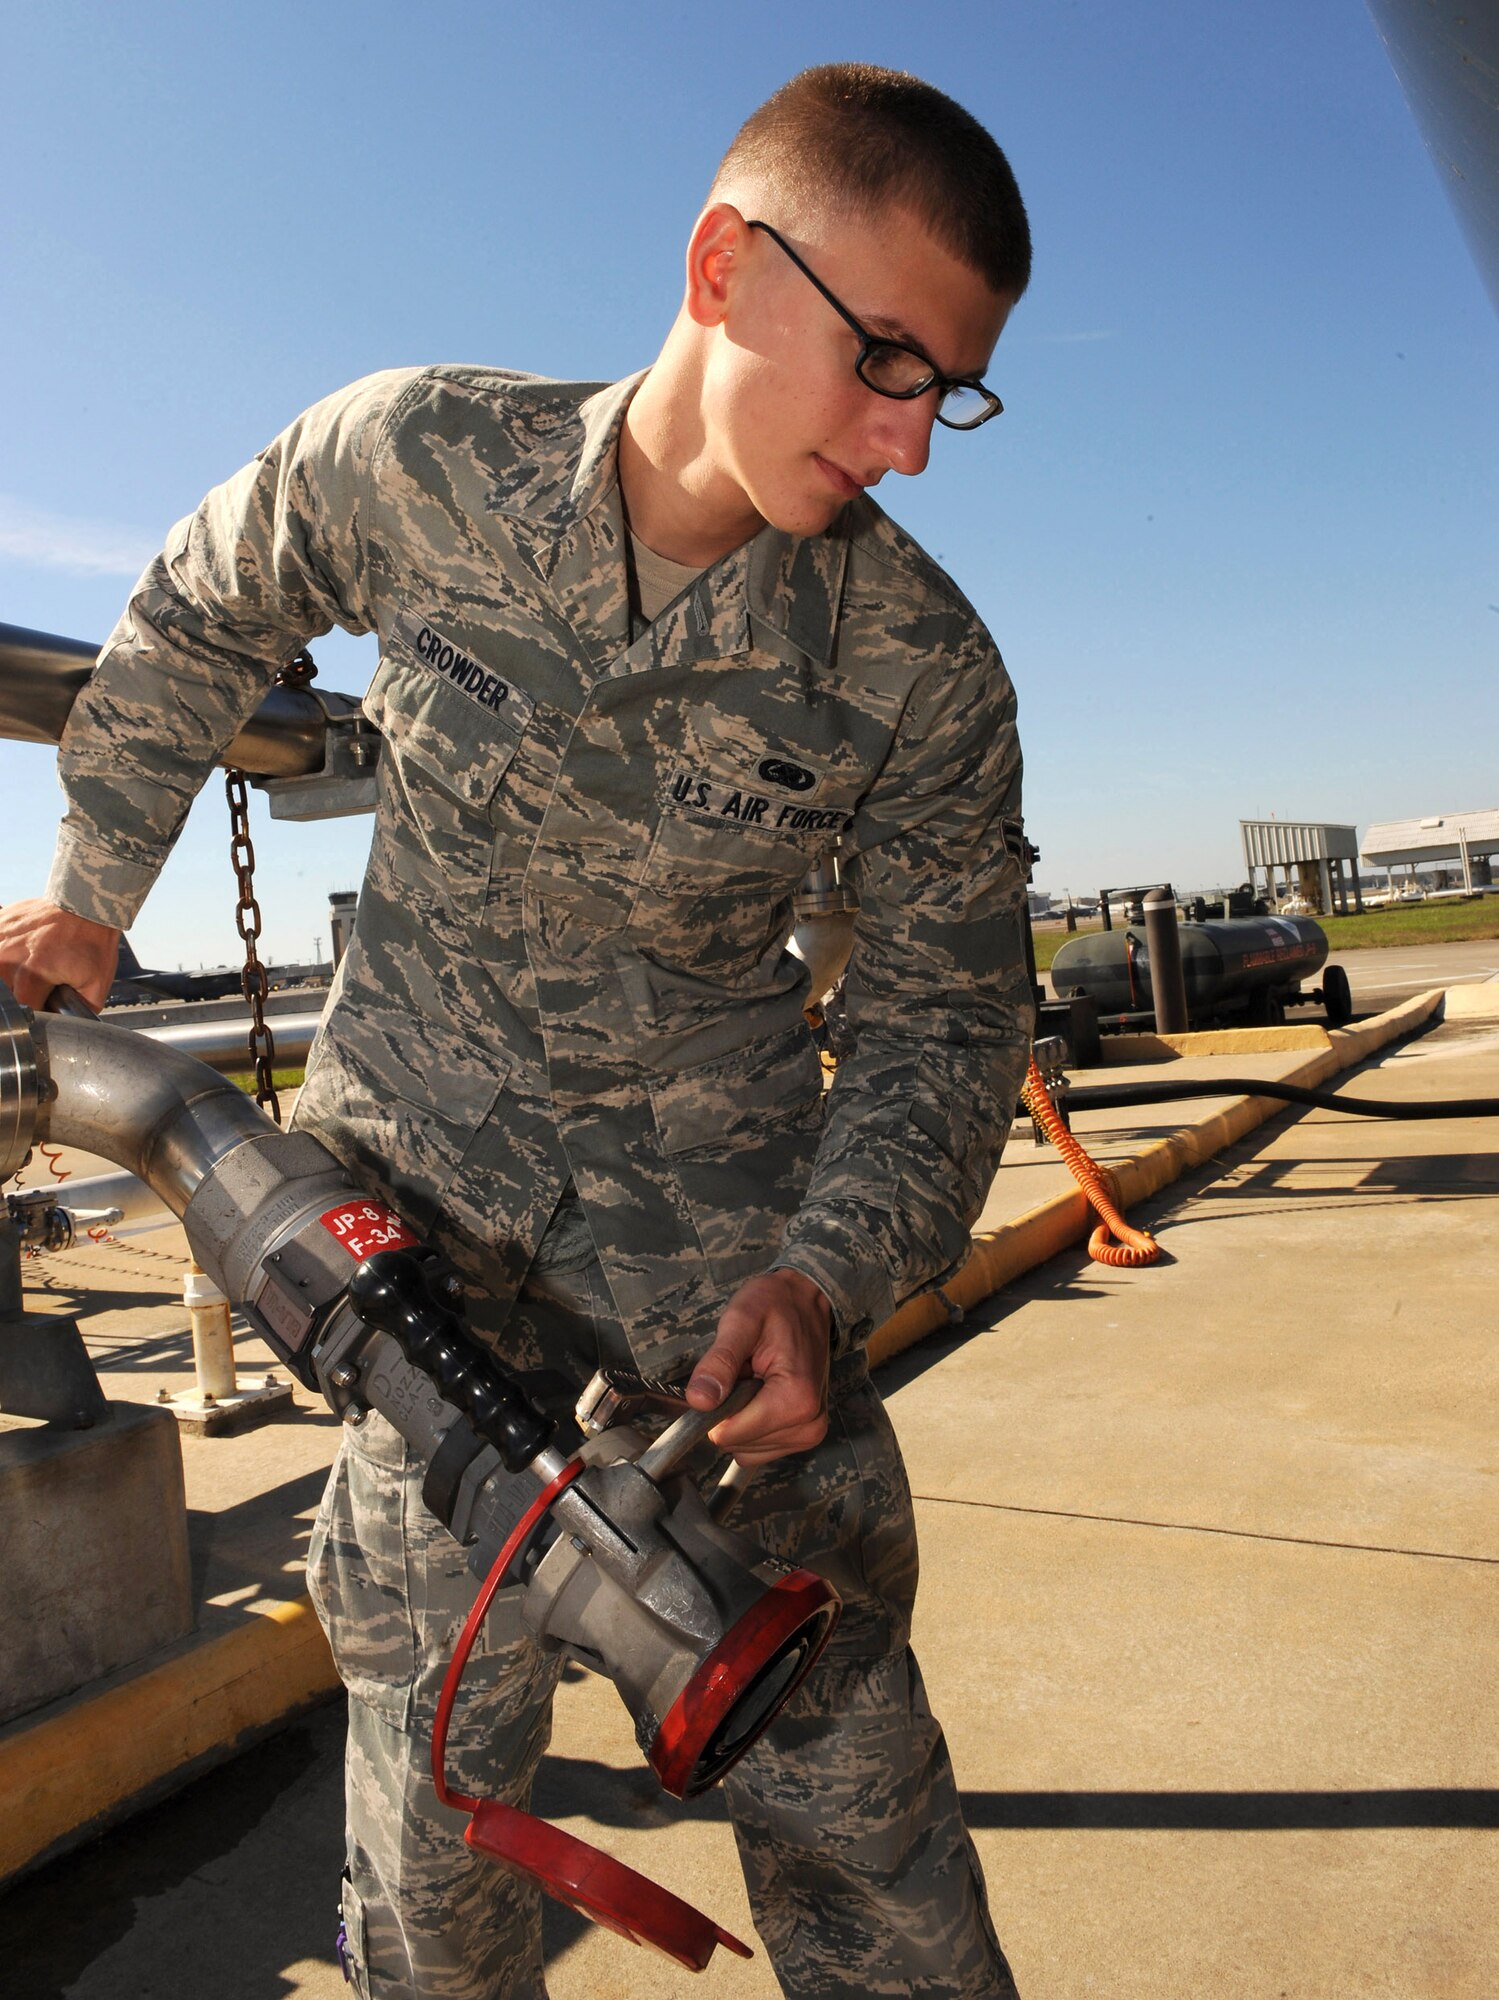 Airman 1st Class Kevin Crowder positions a pantograph arm to attach to an R-11 refueling truck to begin refueling 6,000 gallons of jet fuel to service the C-130 Hercules fleet Oct. 21, 2009, at Little Rock Air Force Base, Ark. Airman Crowder is a 19th Logistics Readiness Squadron fuels distribution operator. (U.S. Air Force photo/Staff Sgt. Chad Chisholm) 